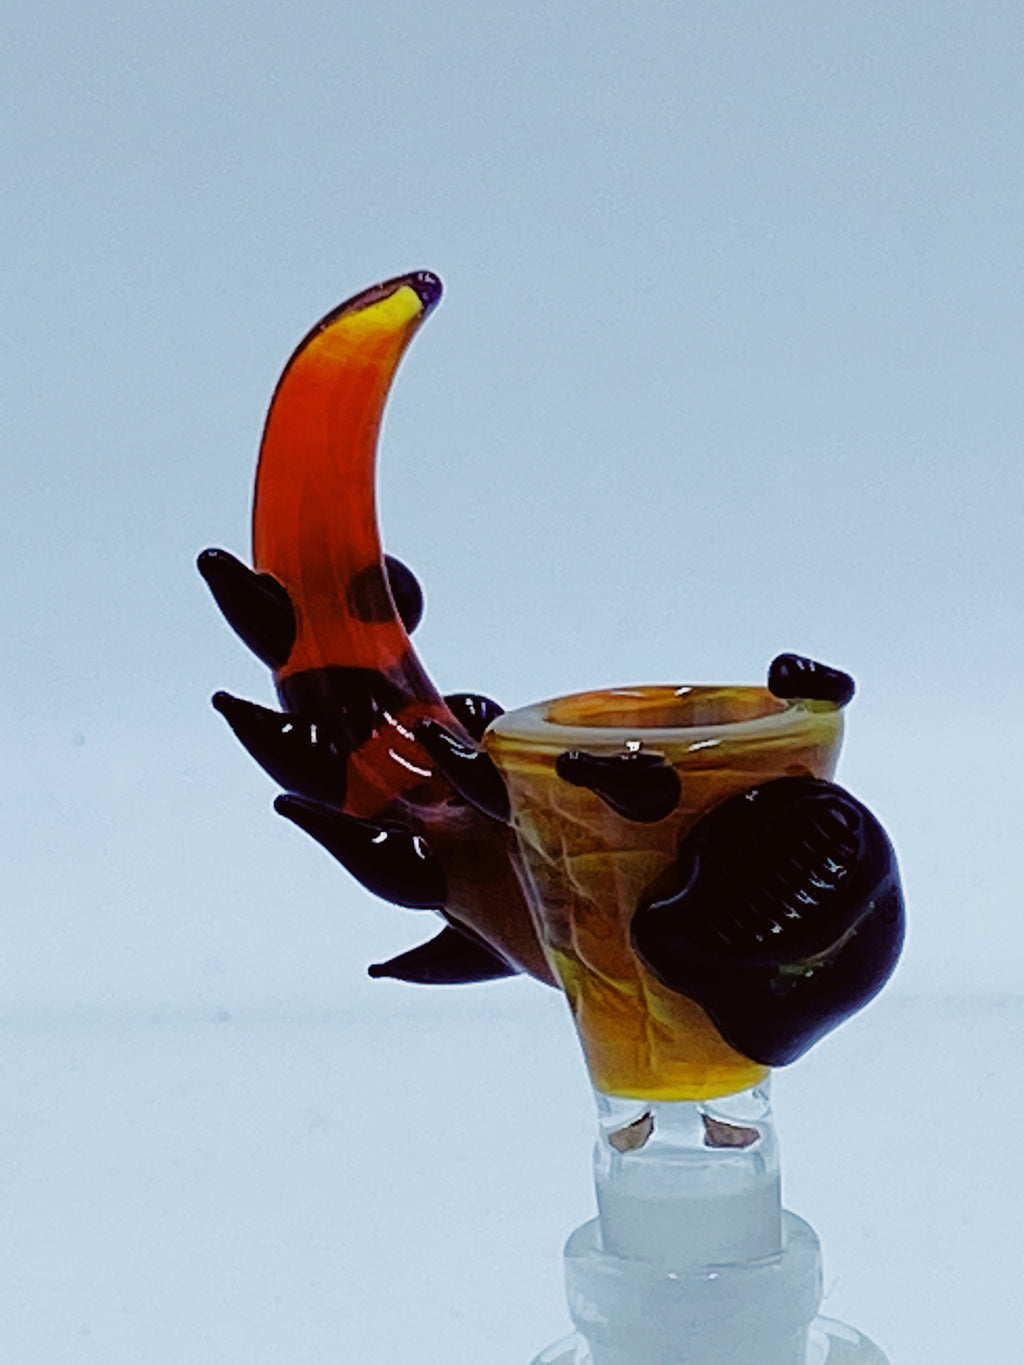 Tear E 14mm Monster Bowl Type 4 - Smoke Country - Land of the artistic glass blown bongs